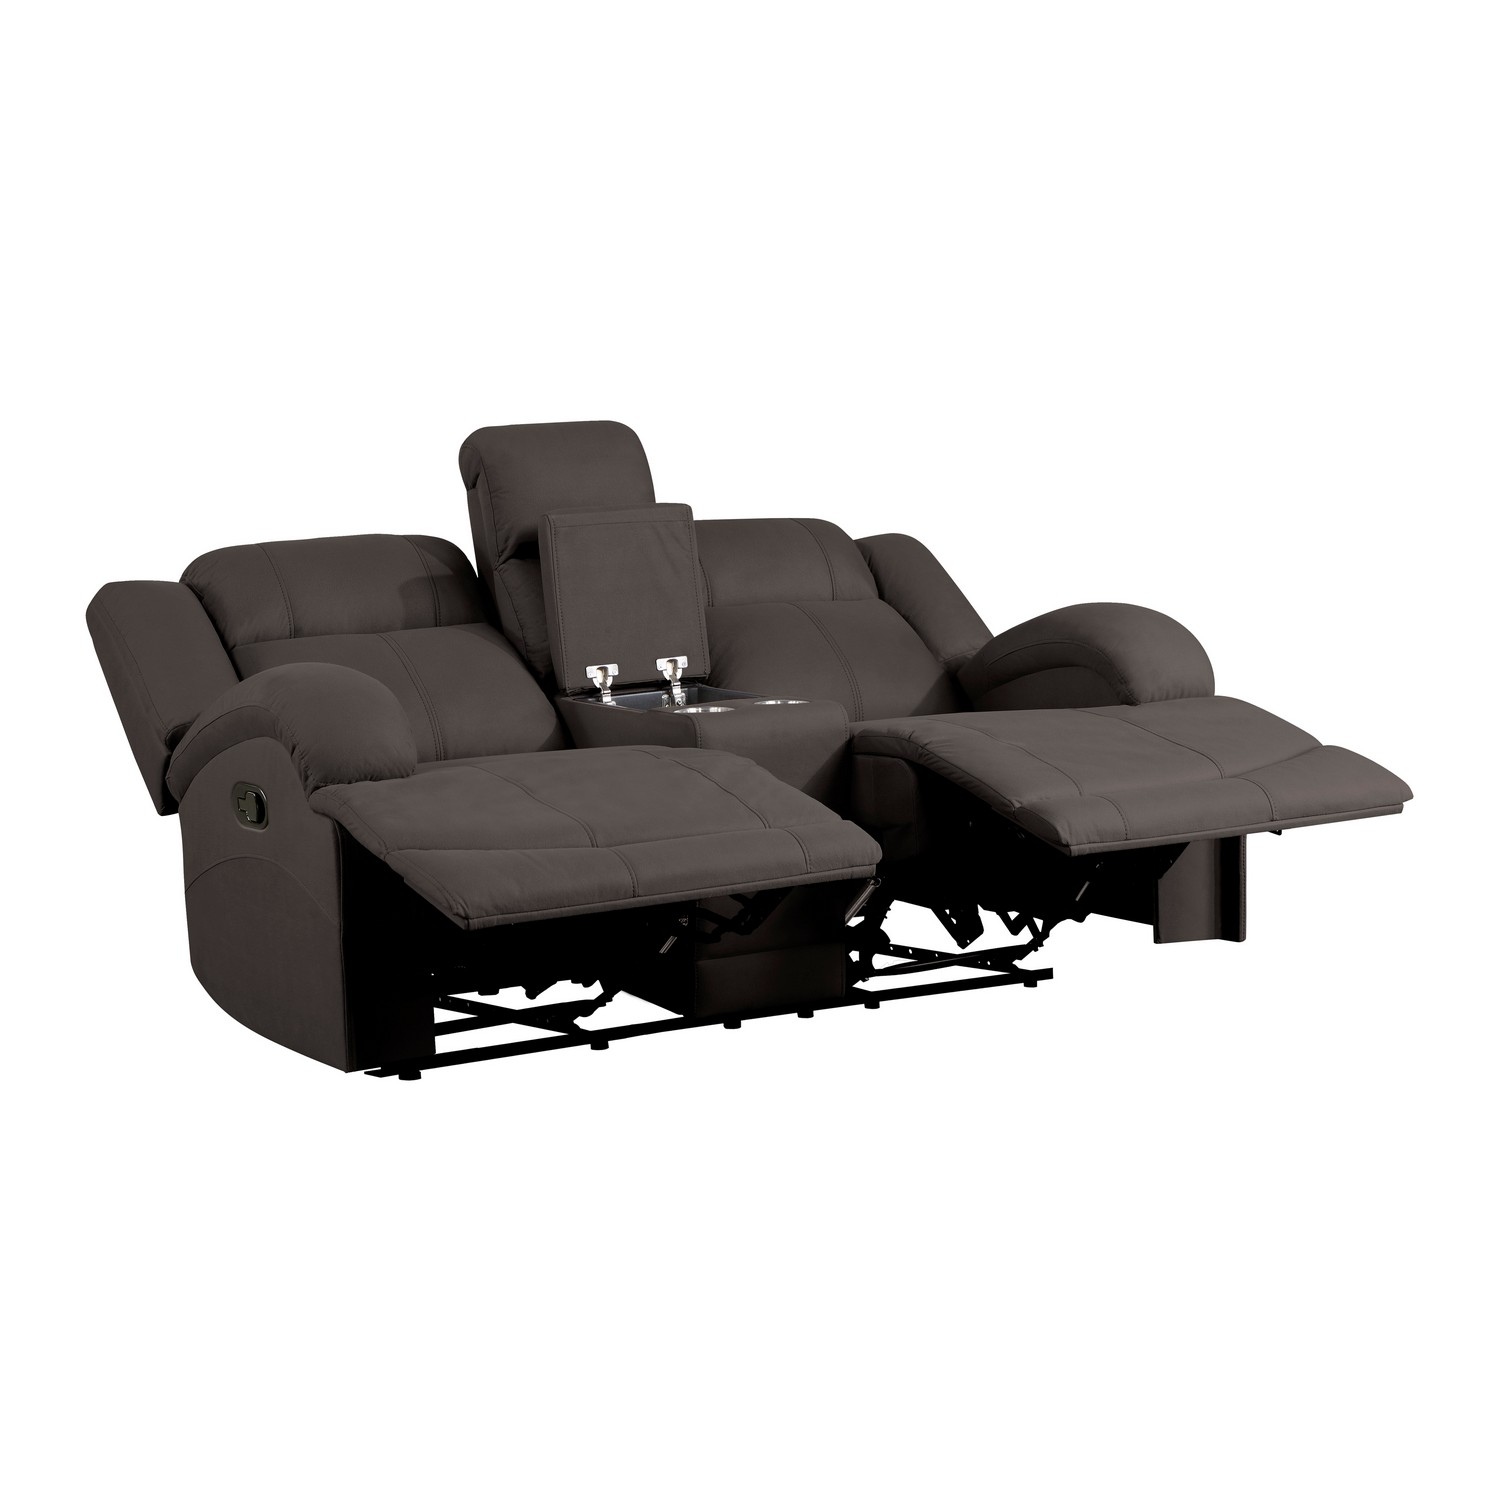 Homelegance Camryn Double Reclining Love Seat - Chocolate